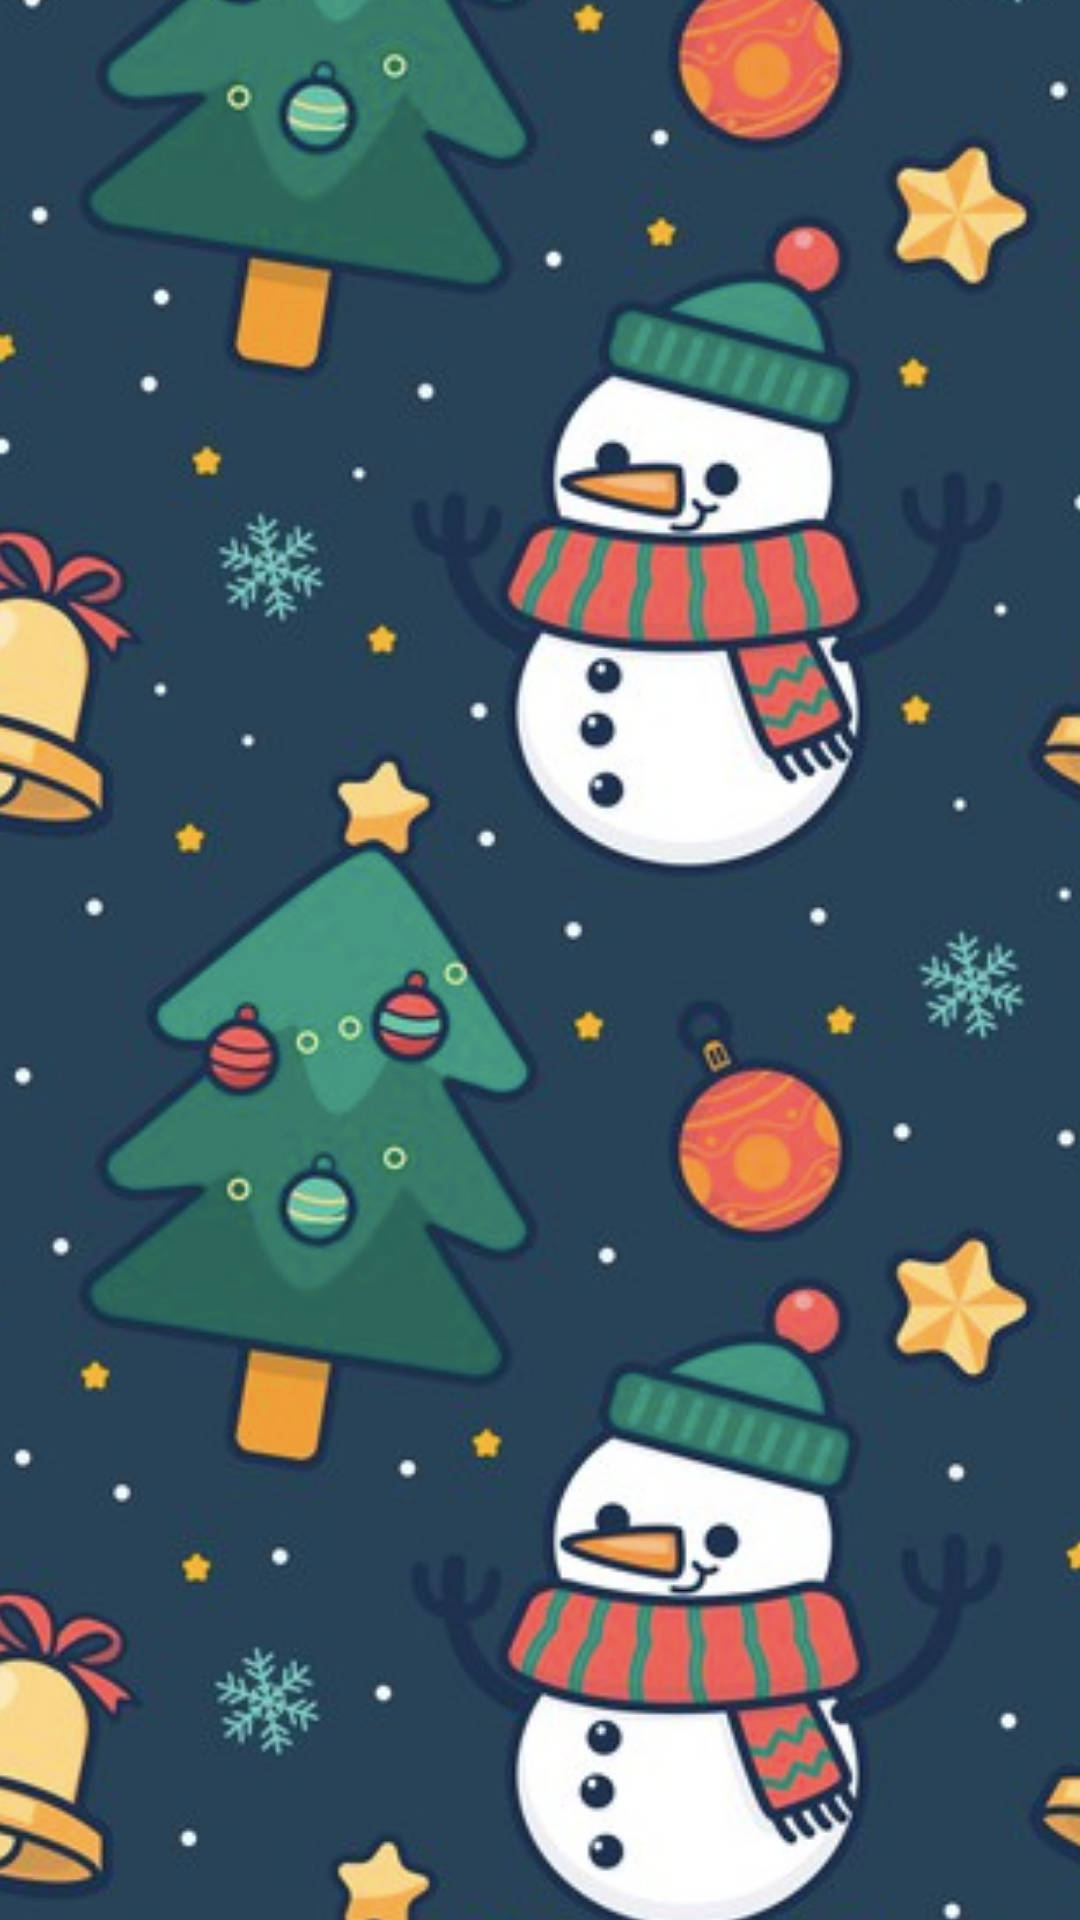 100+] Cute Christmas Iphone Wallpapers